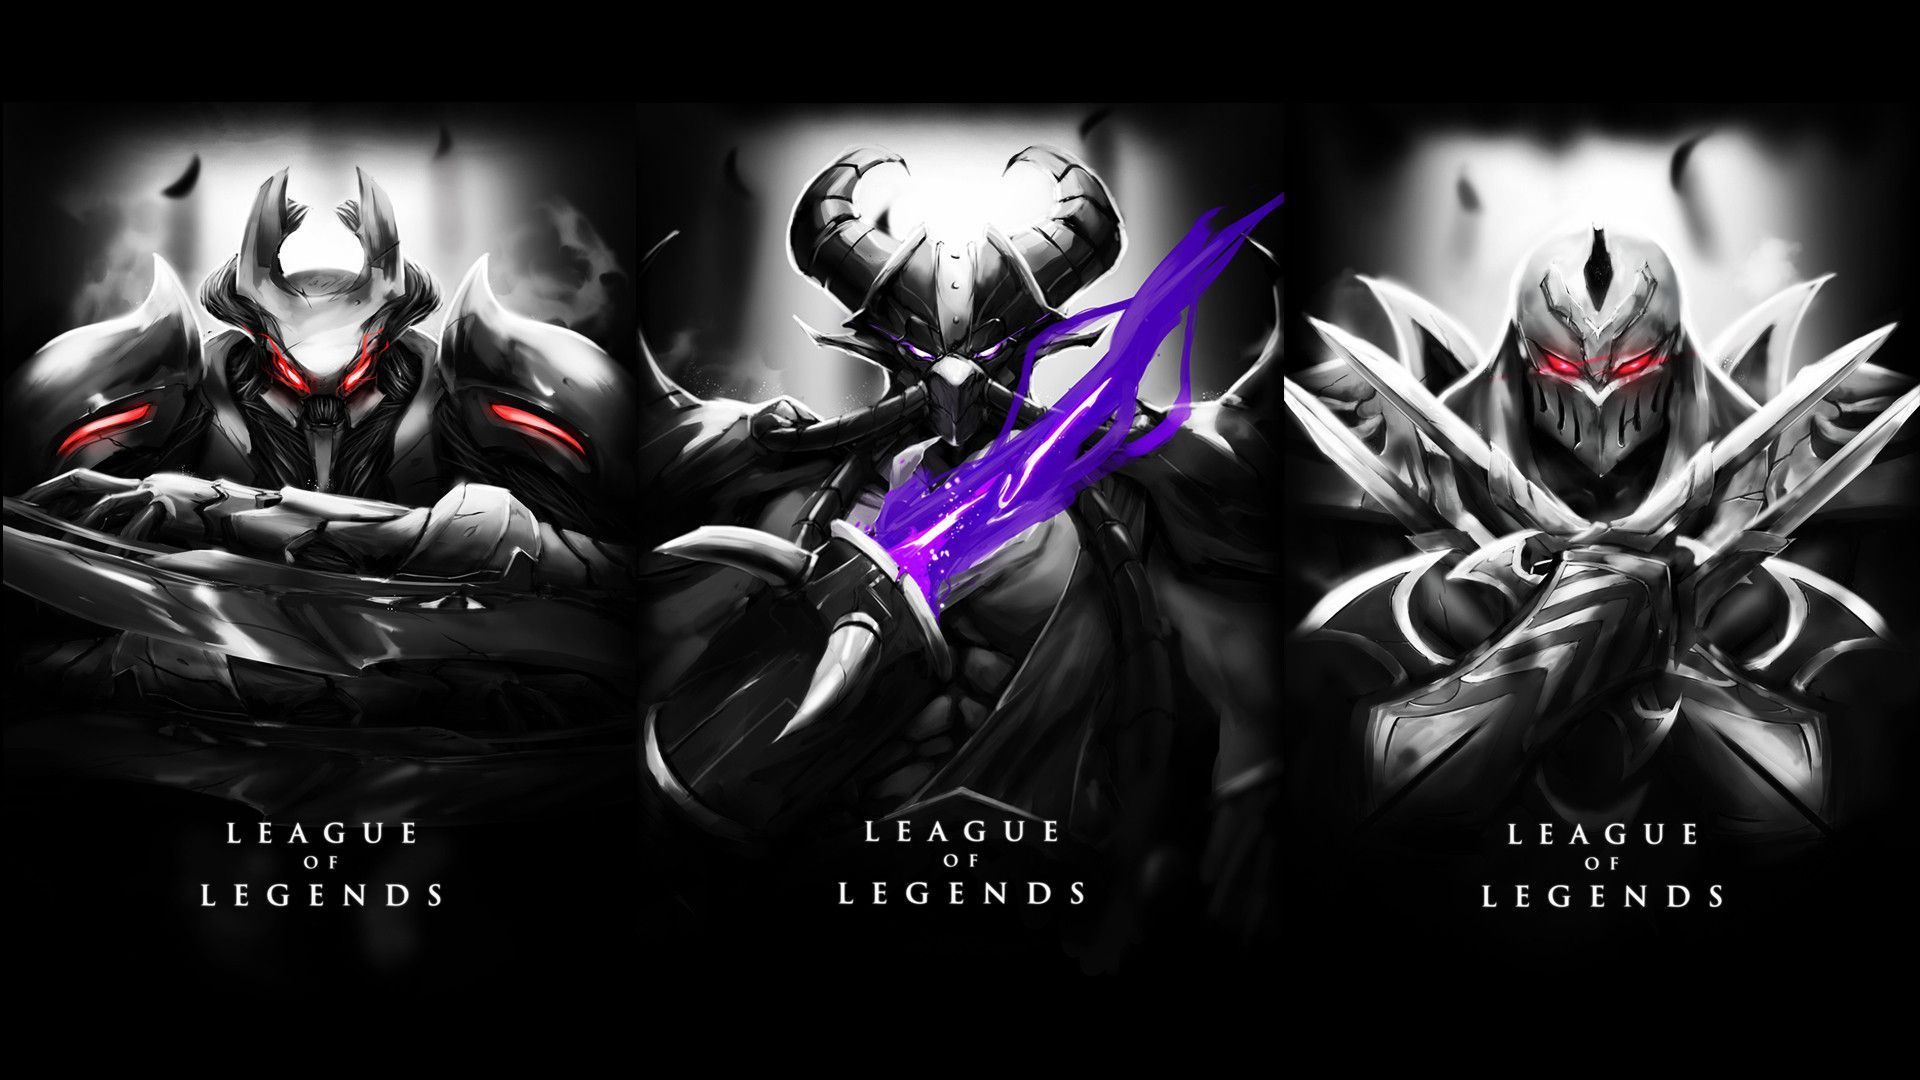 League of Legends mostly HD Wallpaper album over 300